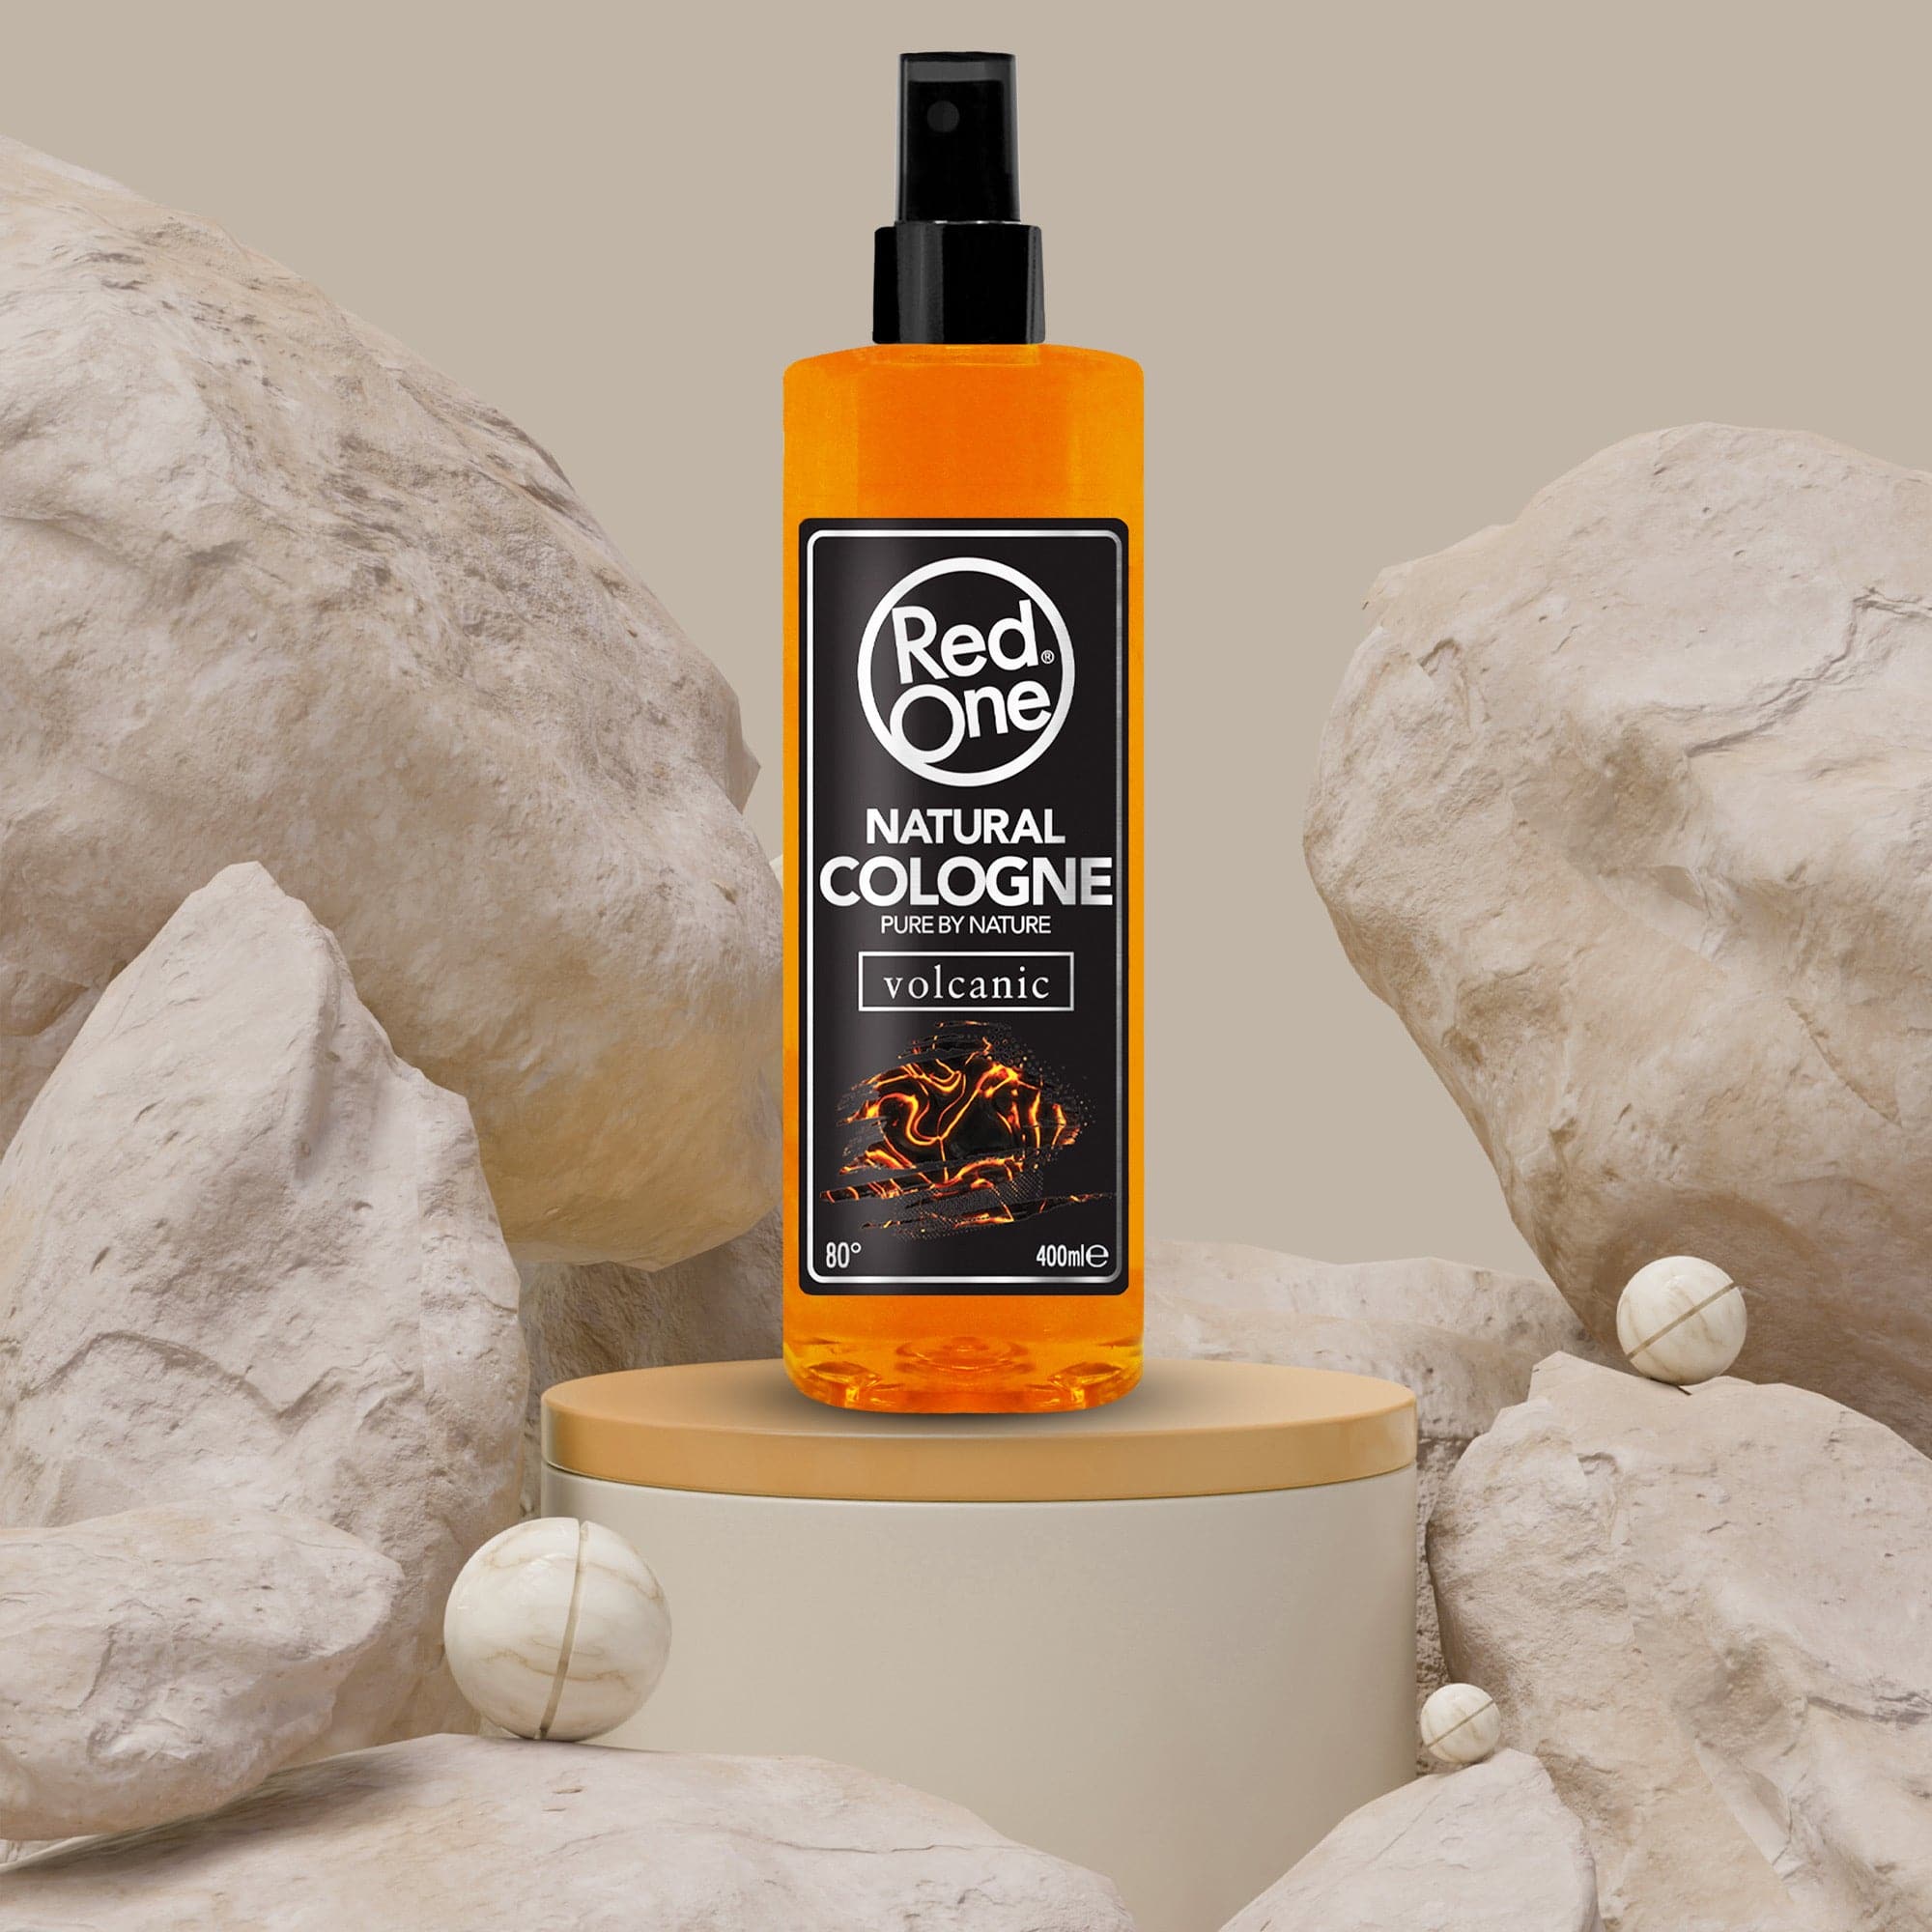 Redone - Natural Cologne Spray Volcanic 400ml